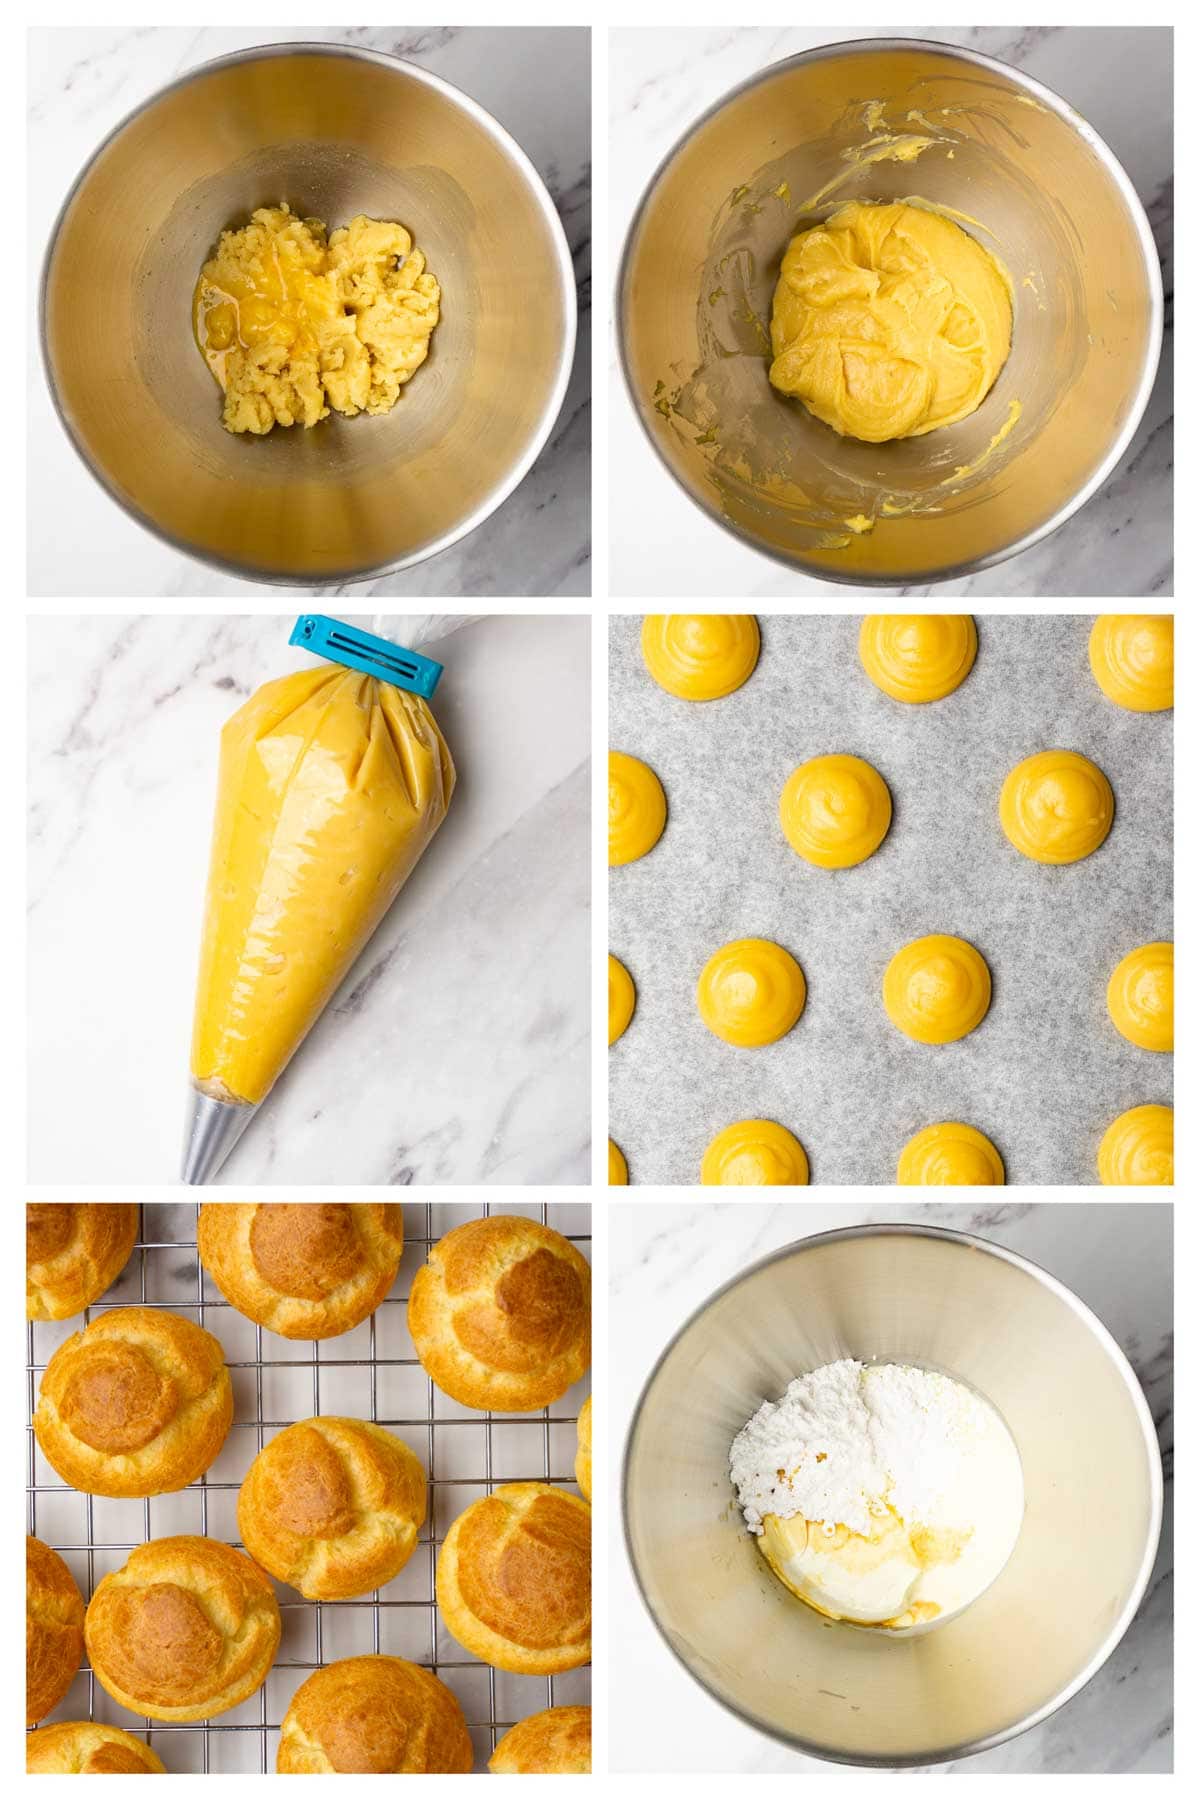 Collage image showing step by step directions to pipe and bake cream puffs and make cream cheese filling.